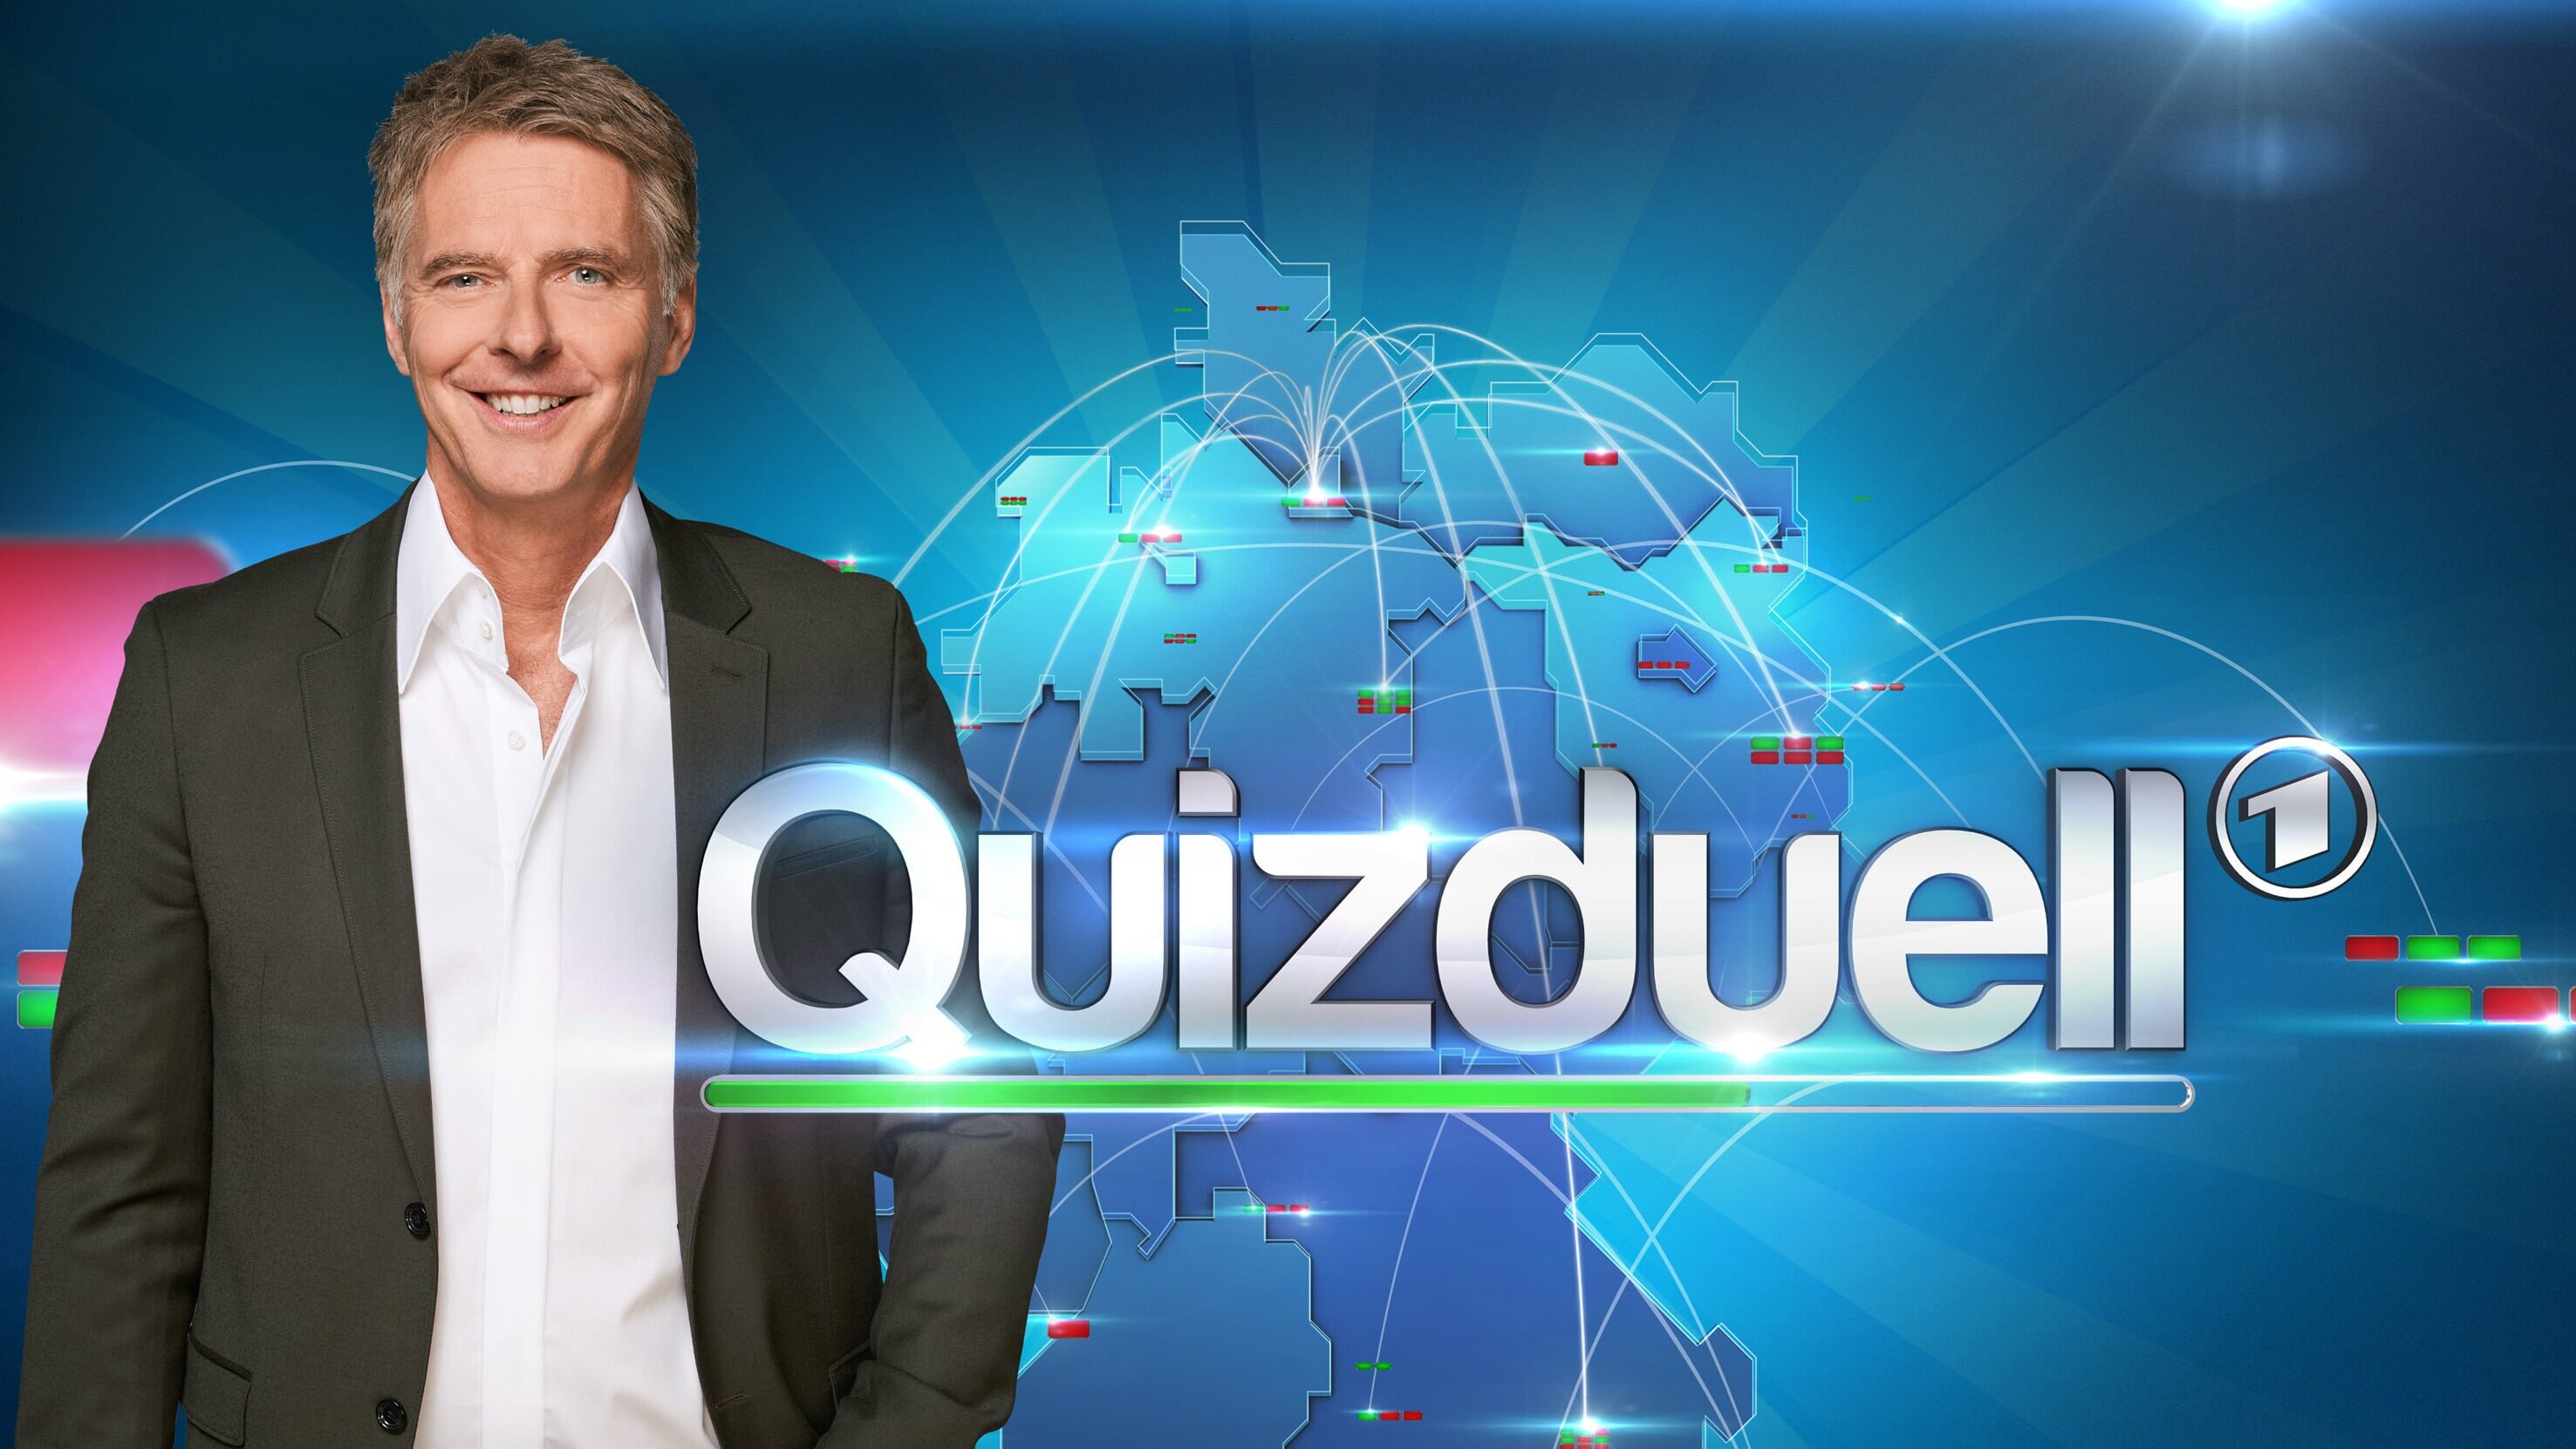 Quizduell – Olymp